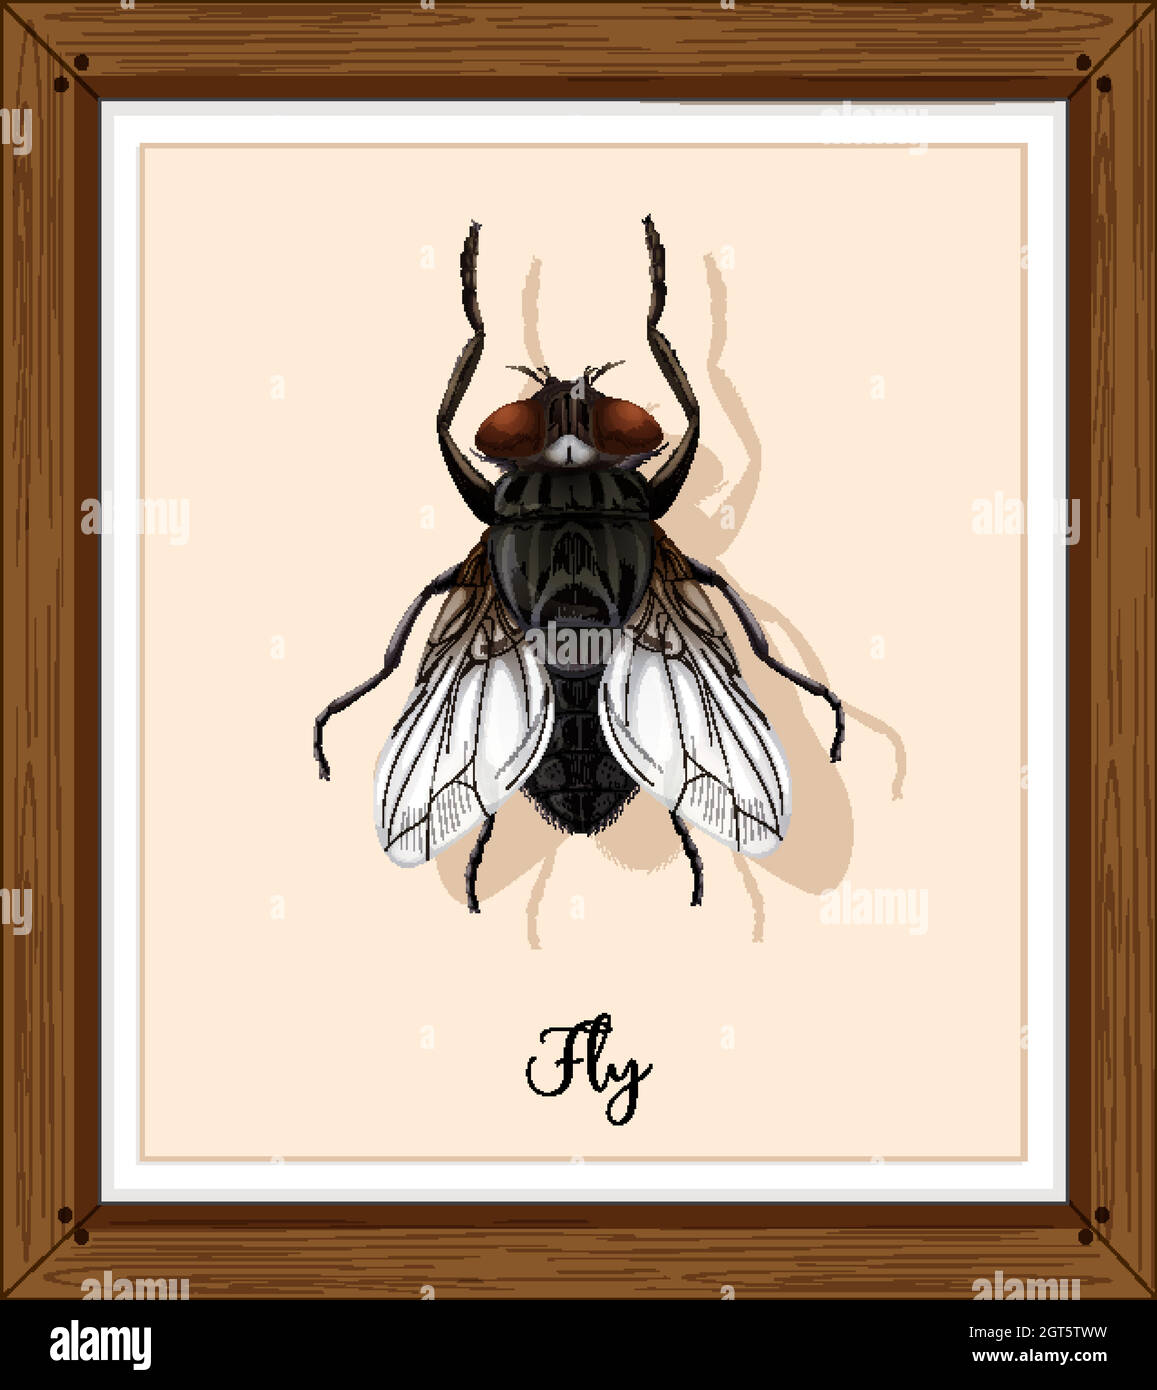 Fly on wooden frame Stock Vector